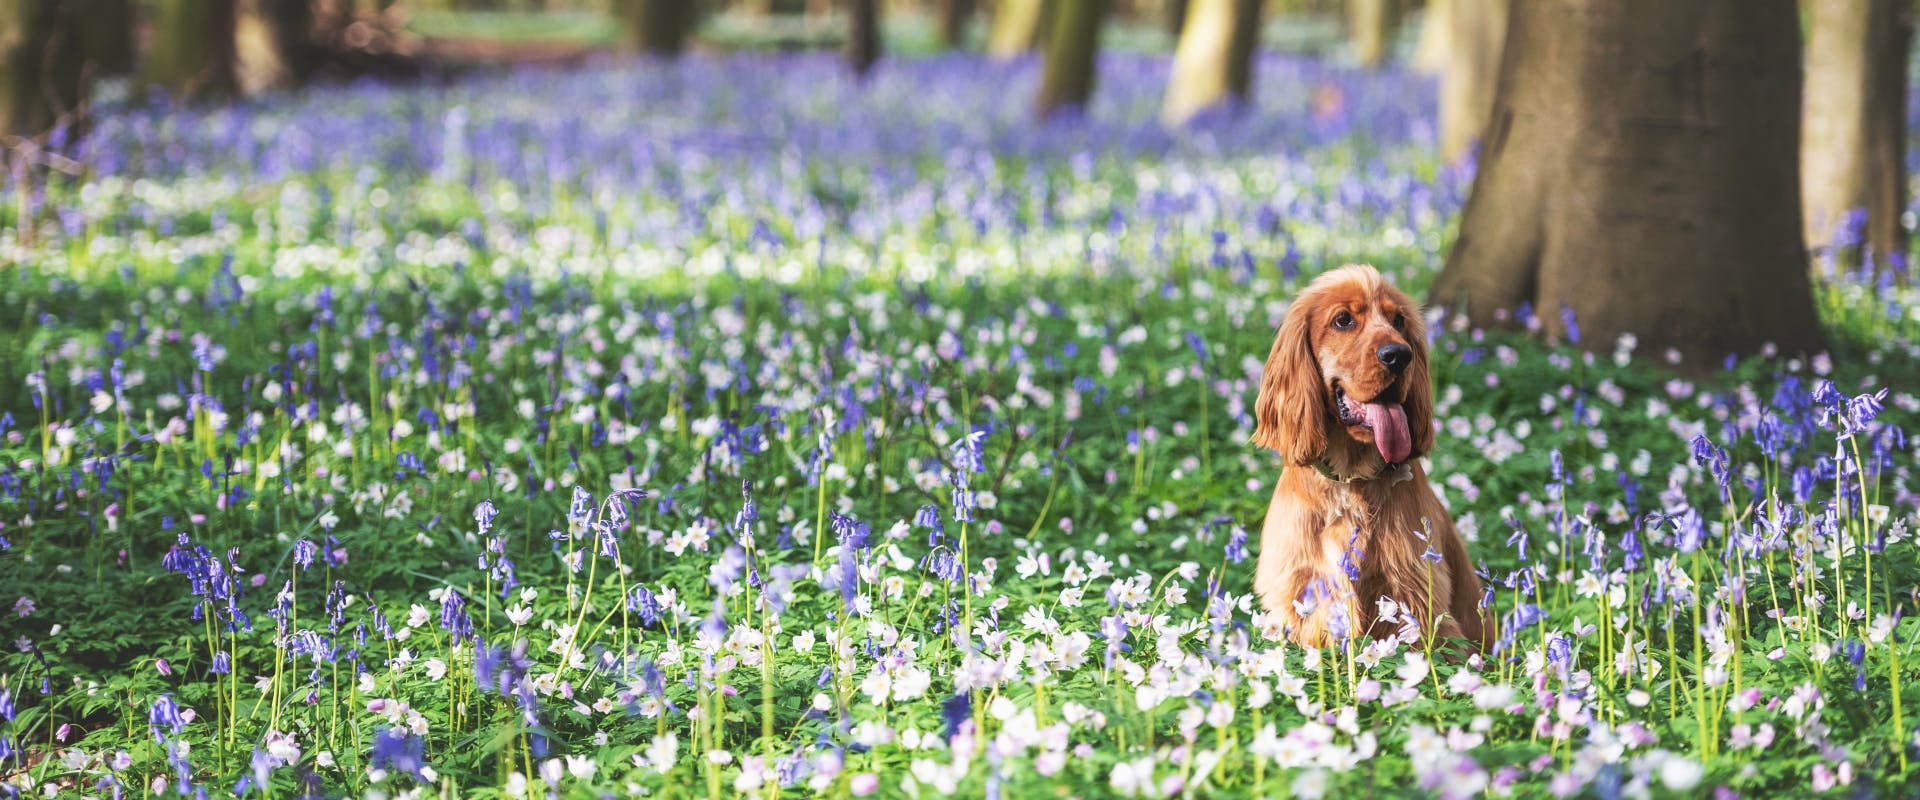 A dog sits in a forest surrounded by flowers. 